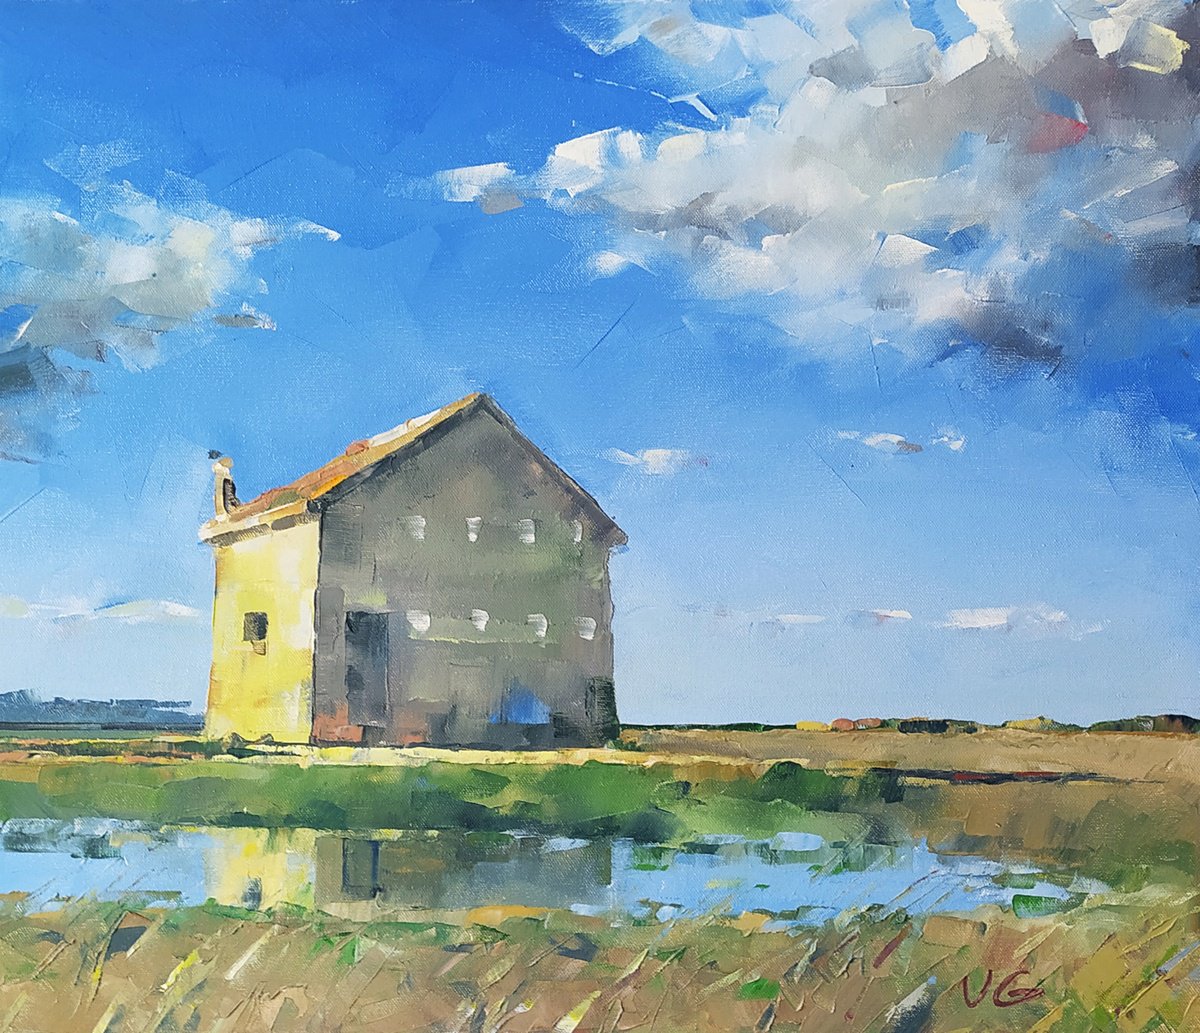 Landscape CELESTIAL MOOD original oil painting old house among rice fields under the brigh... by Volodymyr Glukhomanyuk